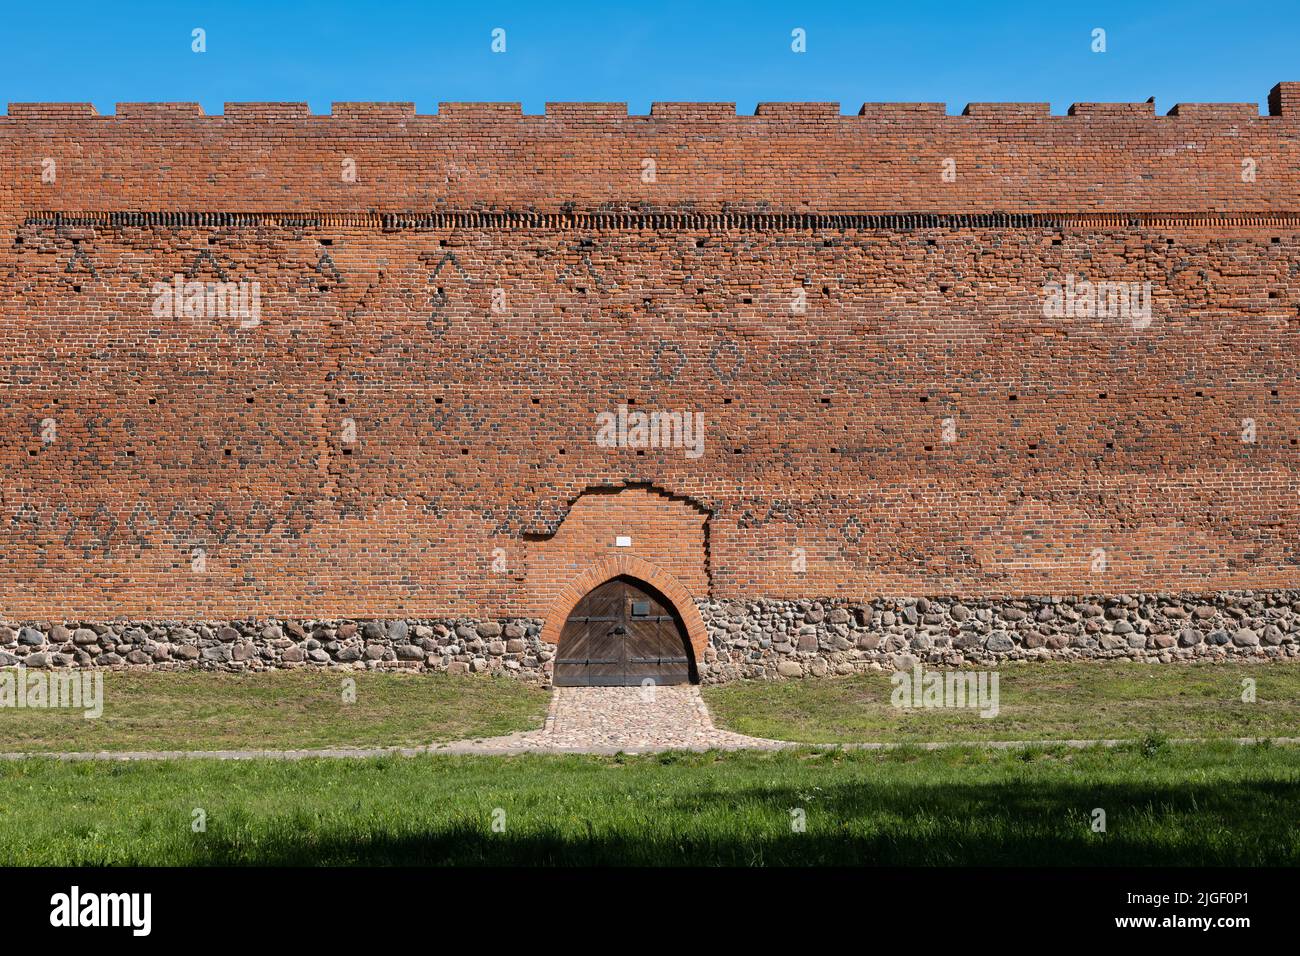 Castle of the Masovian Dukes defensive brick wall and entry gate in Ciechanow, Poland, medieval fortress dating back to the 14th century. Stock Photo